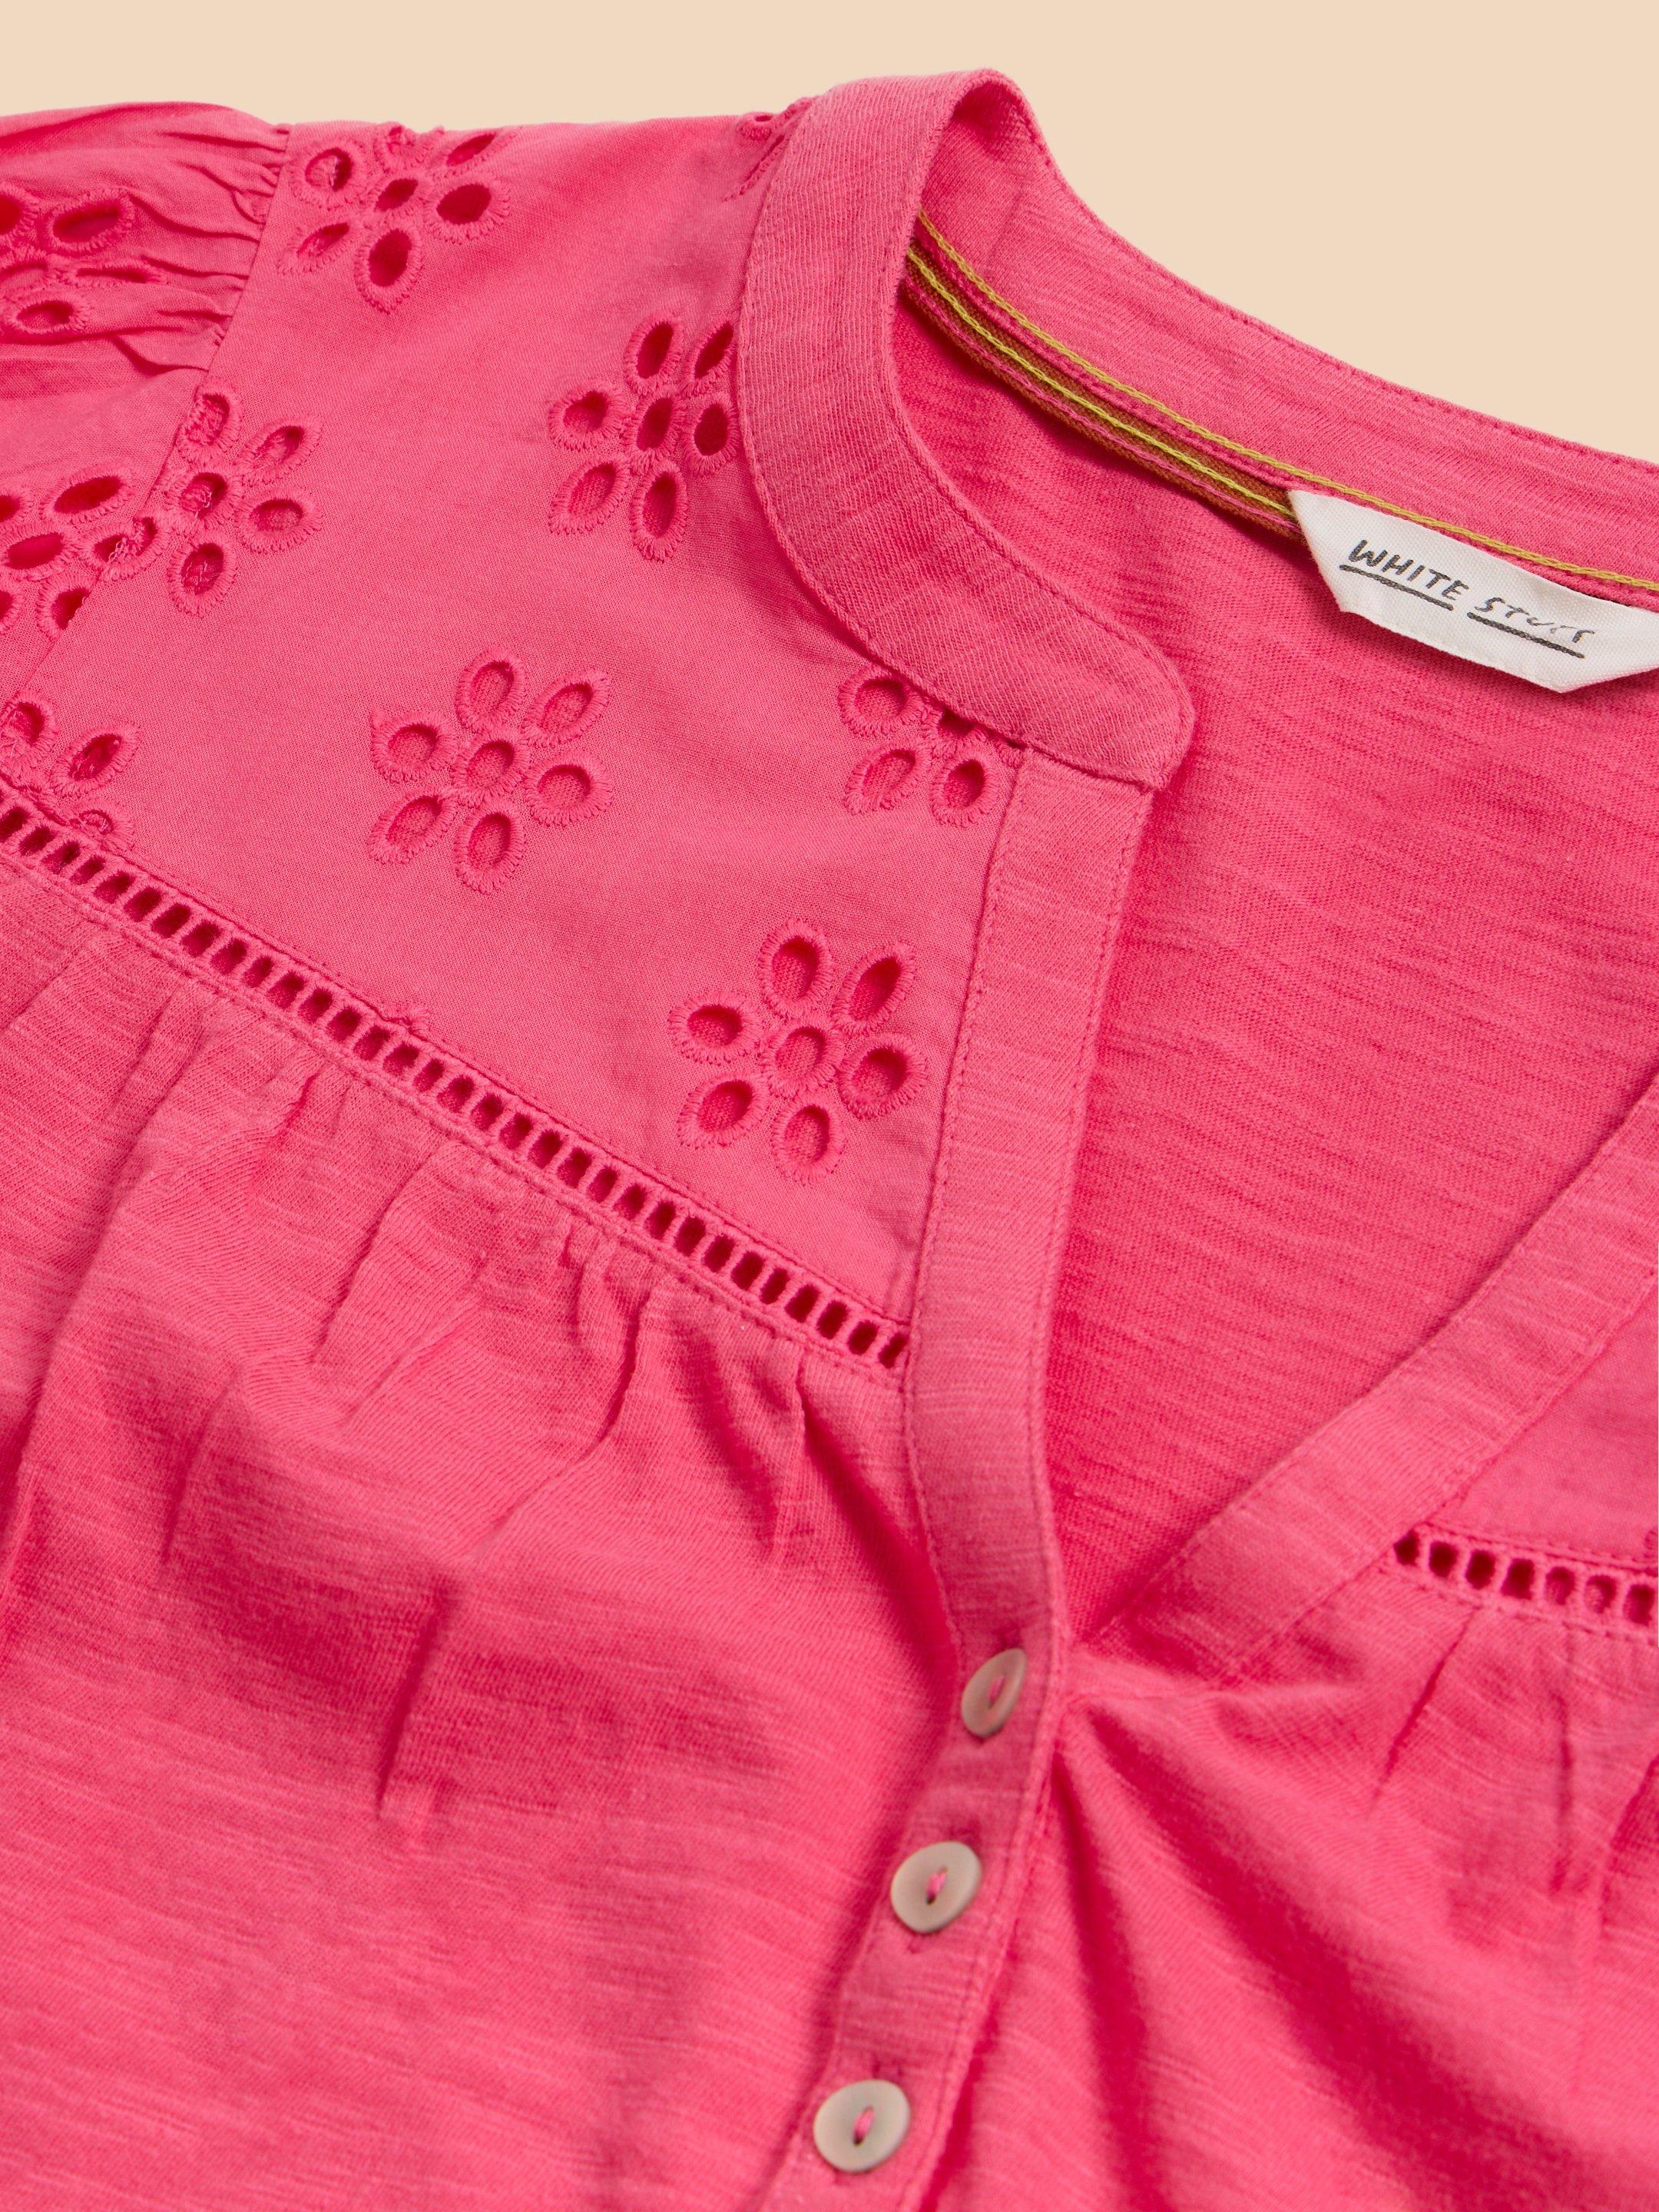 BELLA BRODERIE MIX TOP in MID PINK - FLAT DETAIL